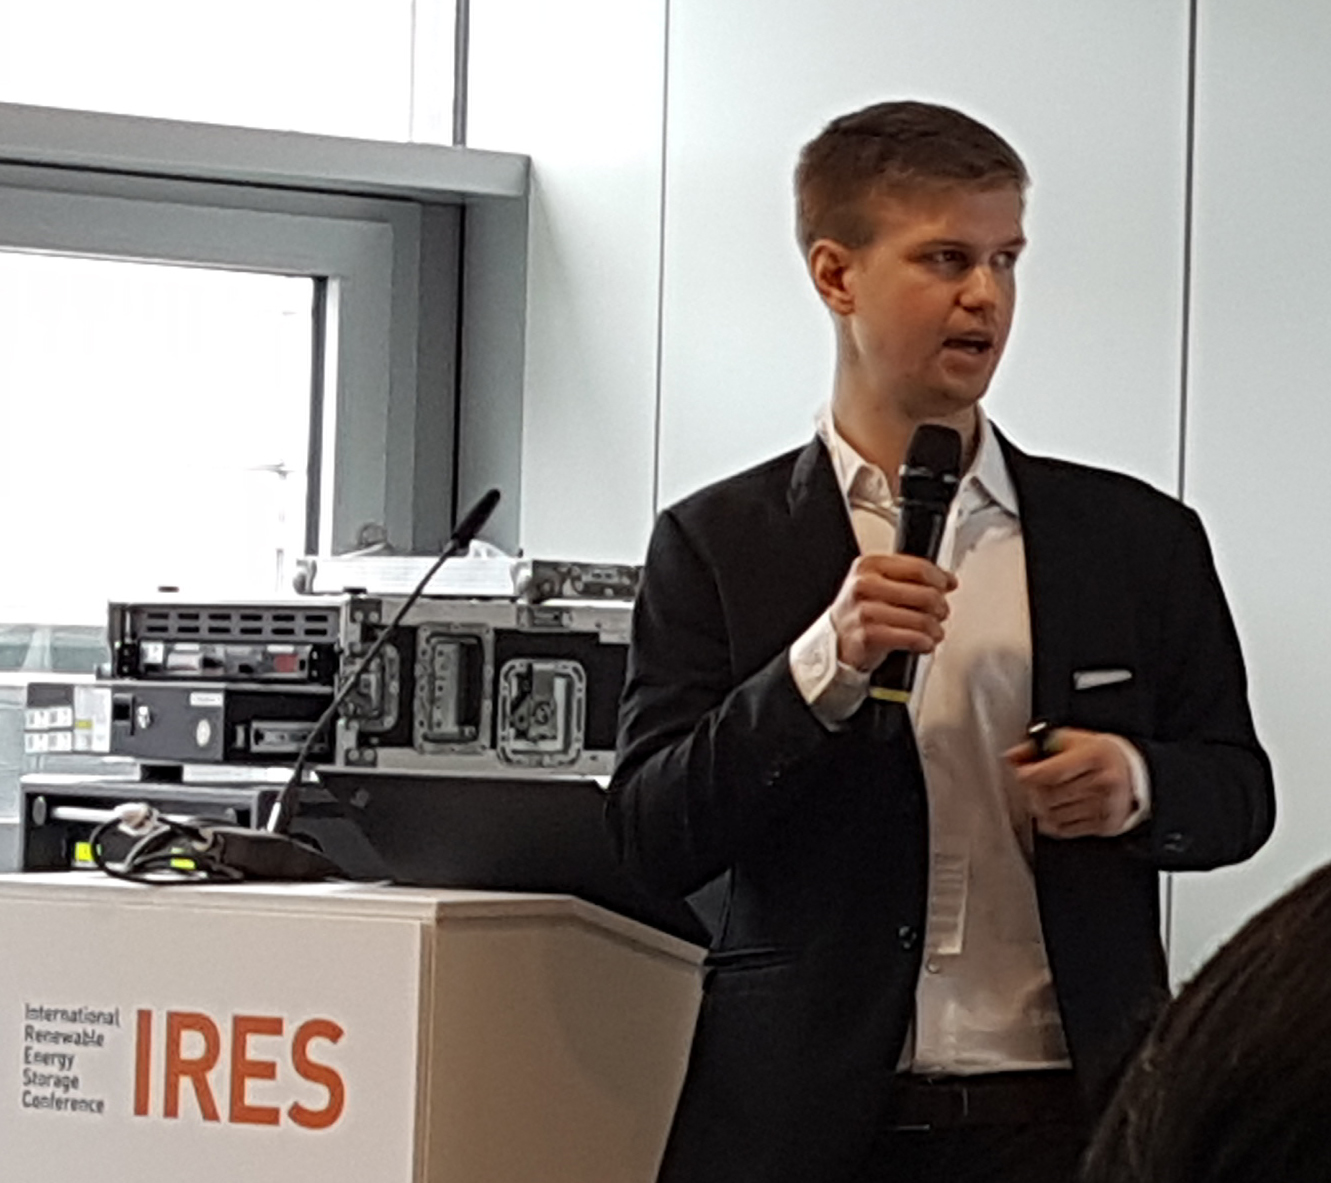 Louis Bahner, from the Energy division at Tractebel, presents the results of research on energy storage at the IRES energy conference.